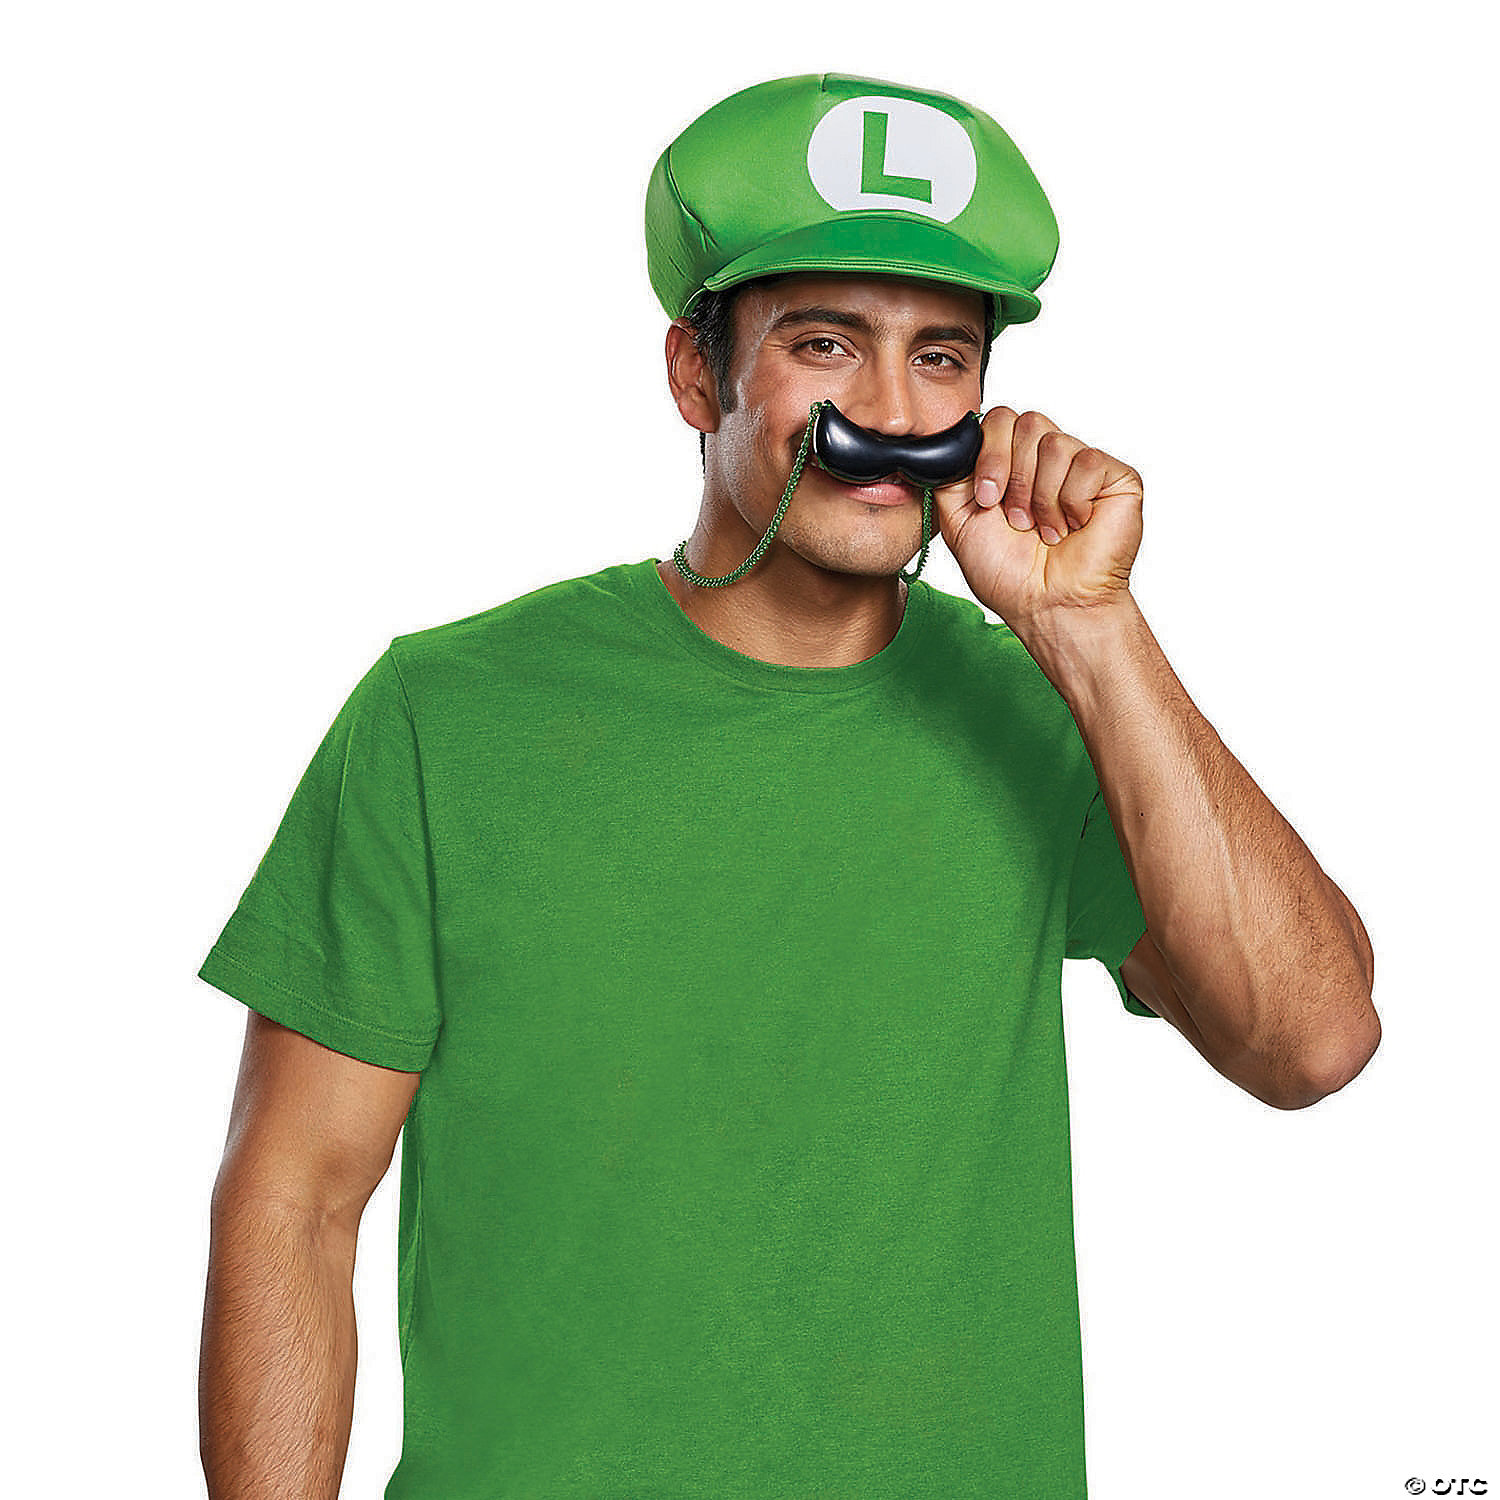 Super Mario Bros. Bowser Costume Accessory Kit for Adults